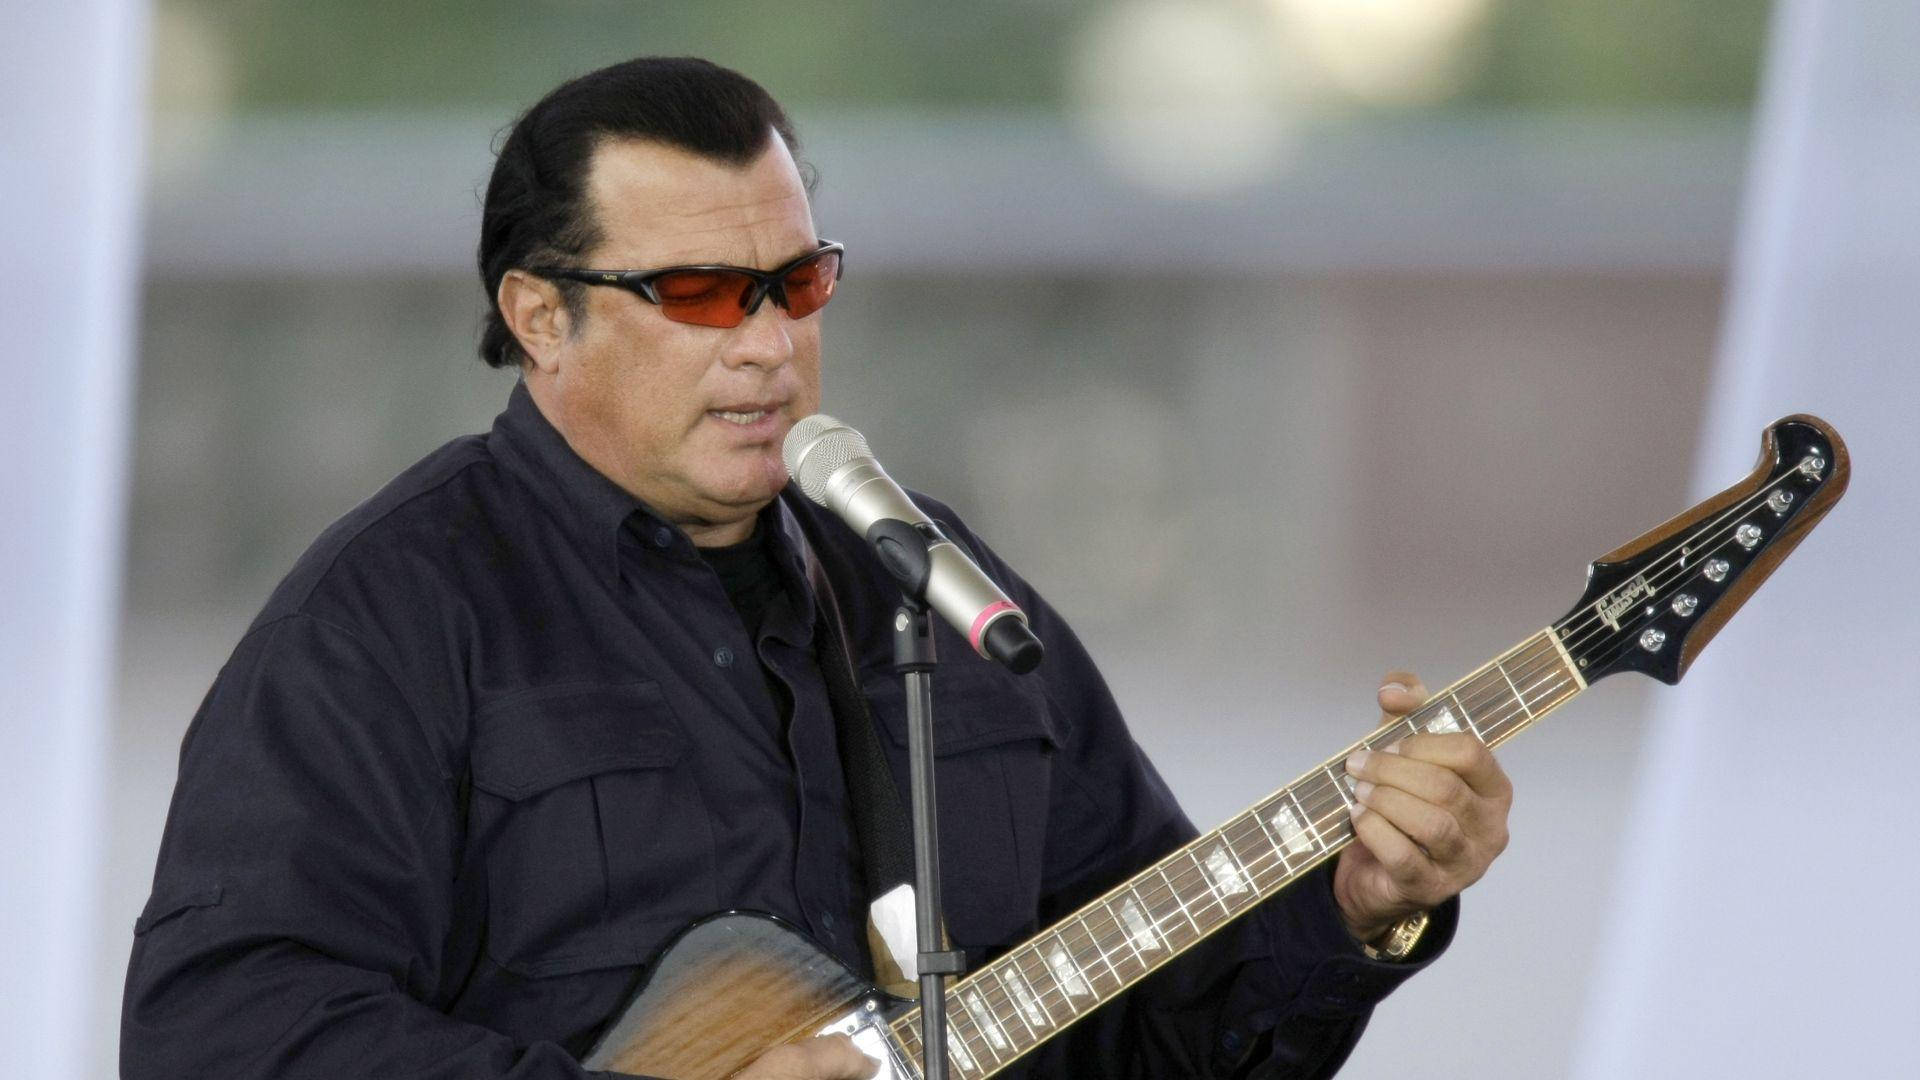 Steven Seagal: Actor, Producer, Musician Background